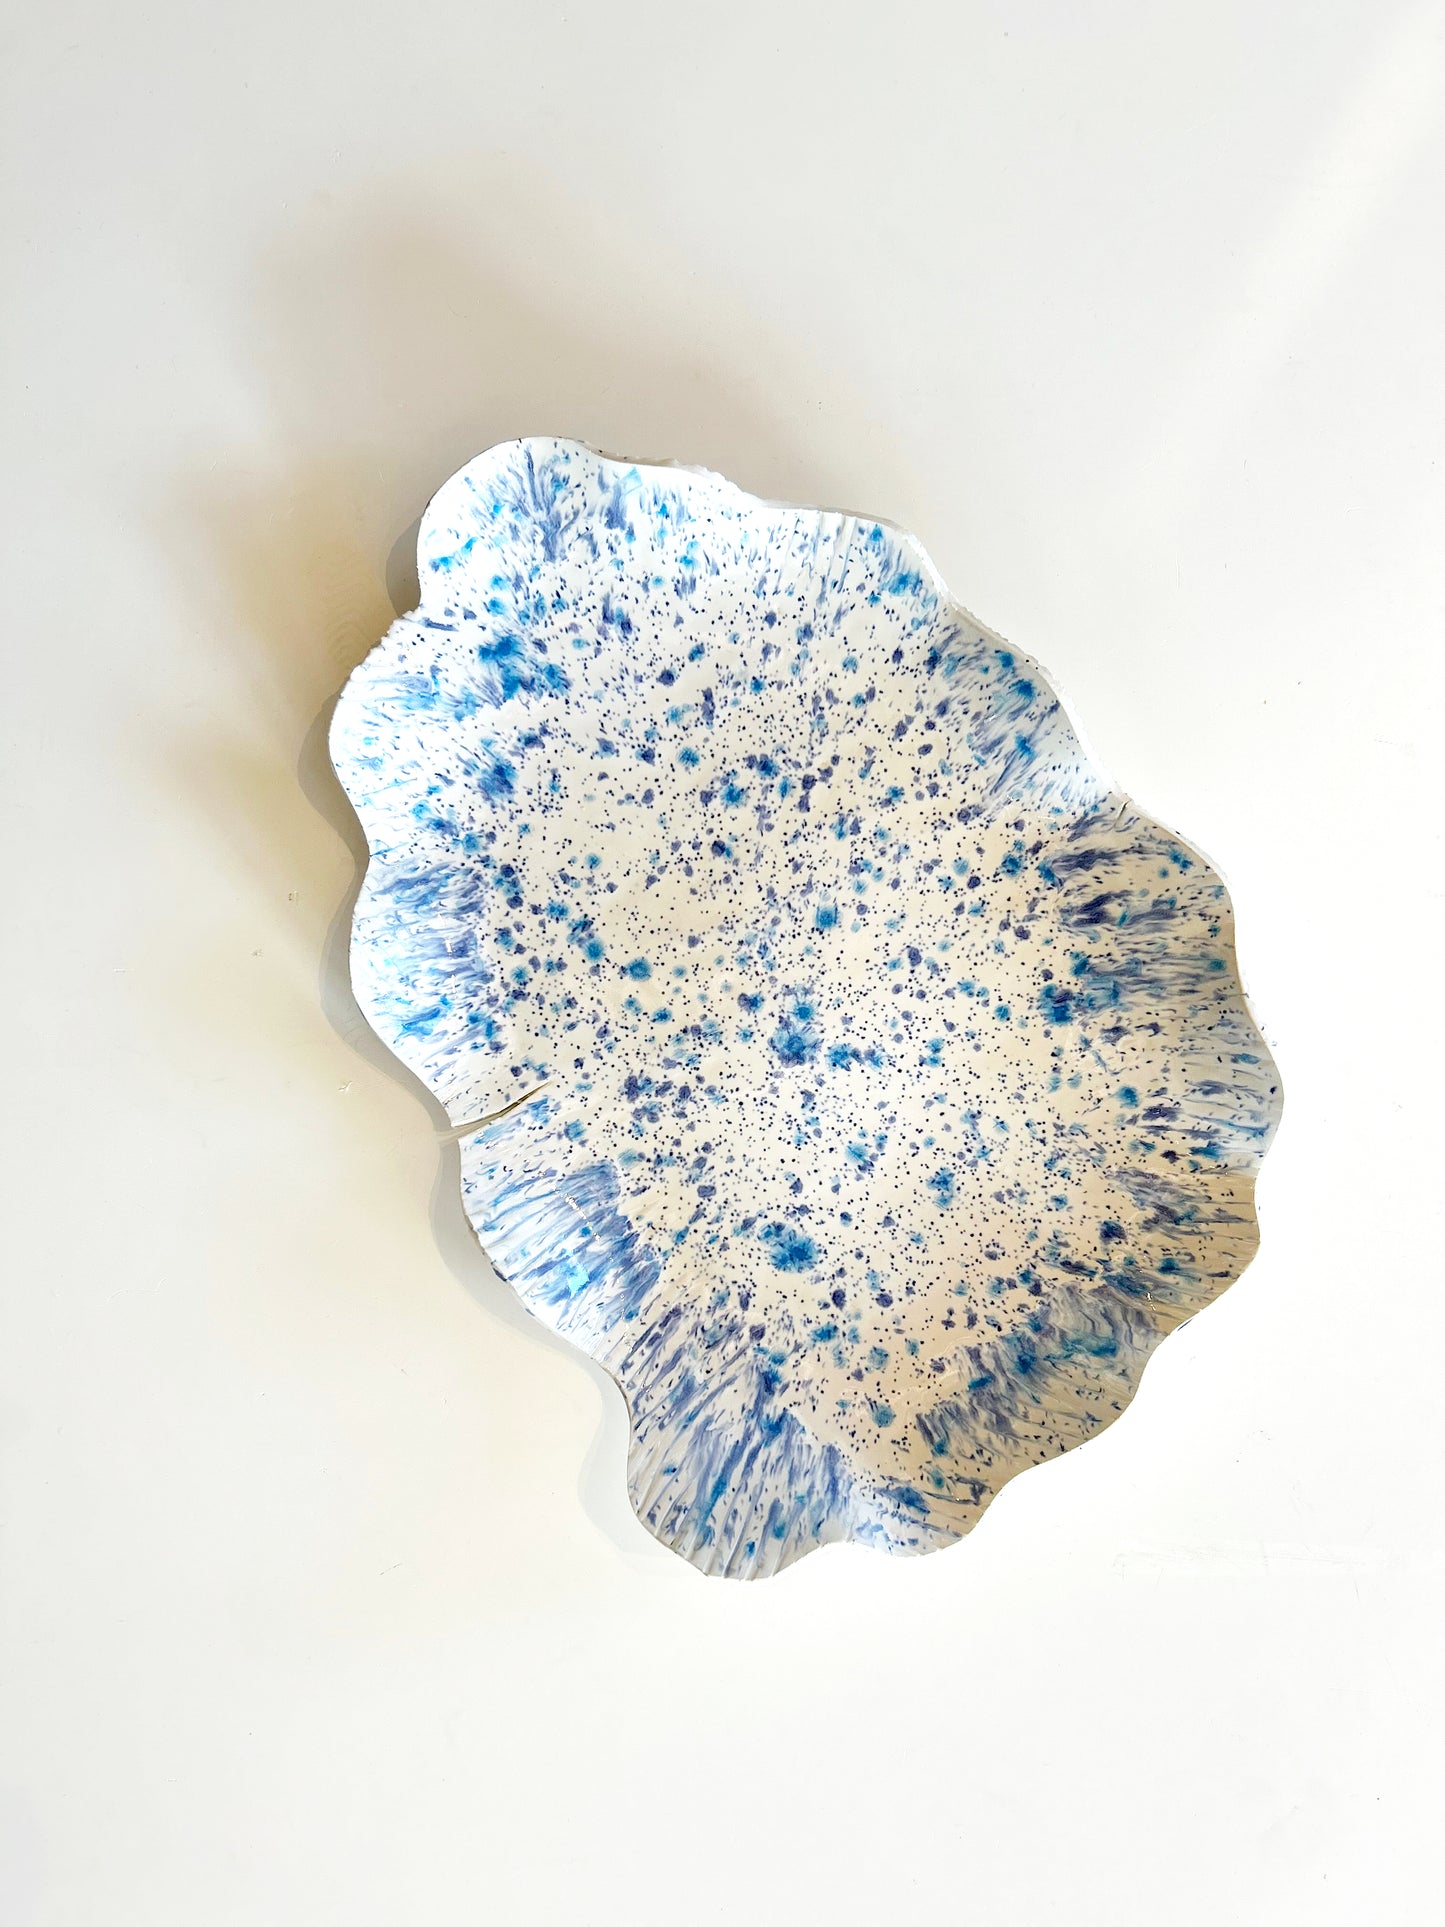 Emily Adkins blue speckled plate